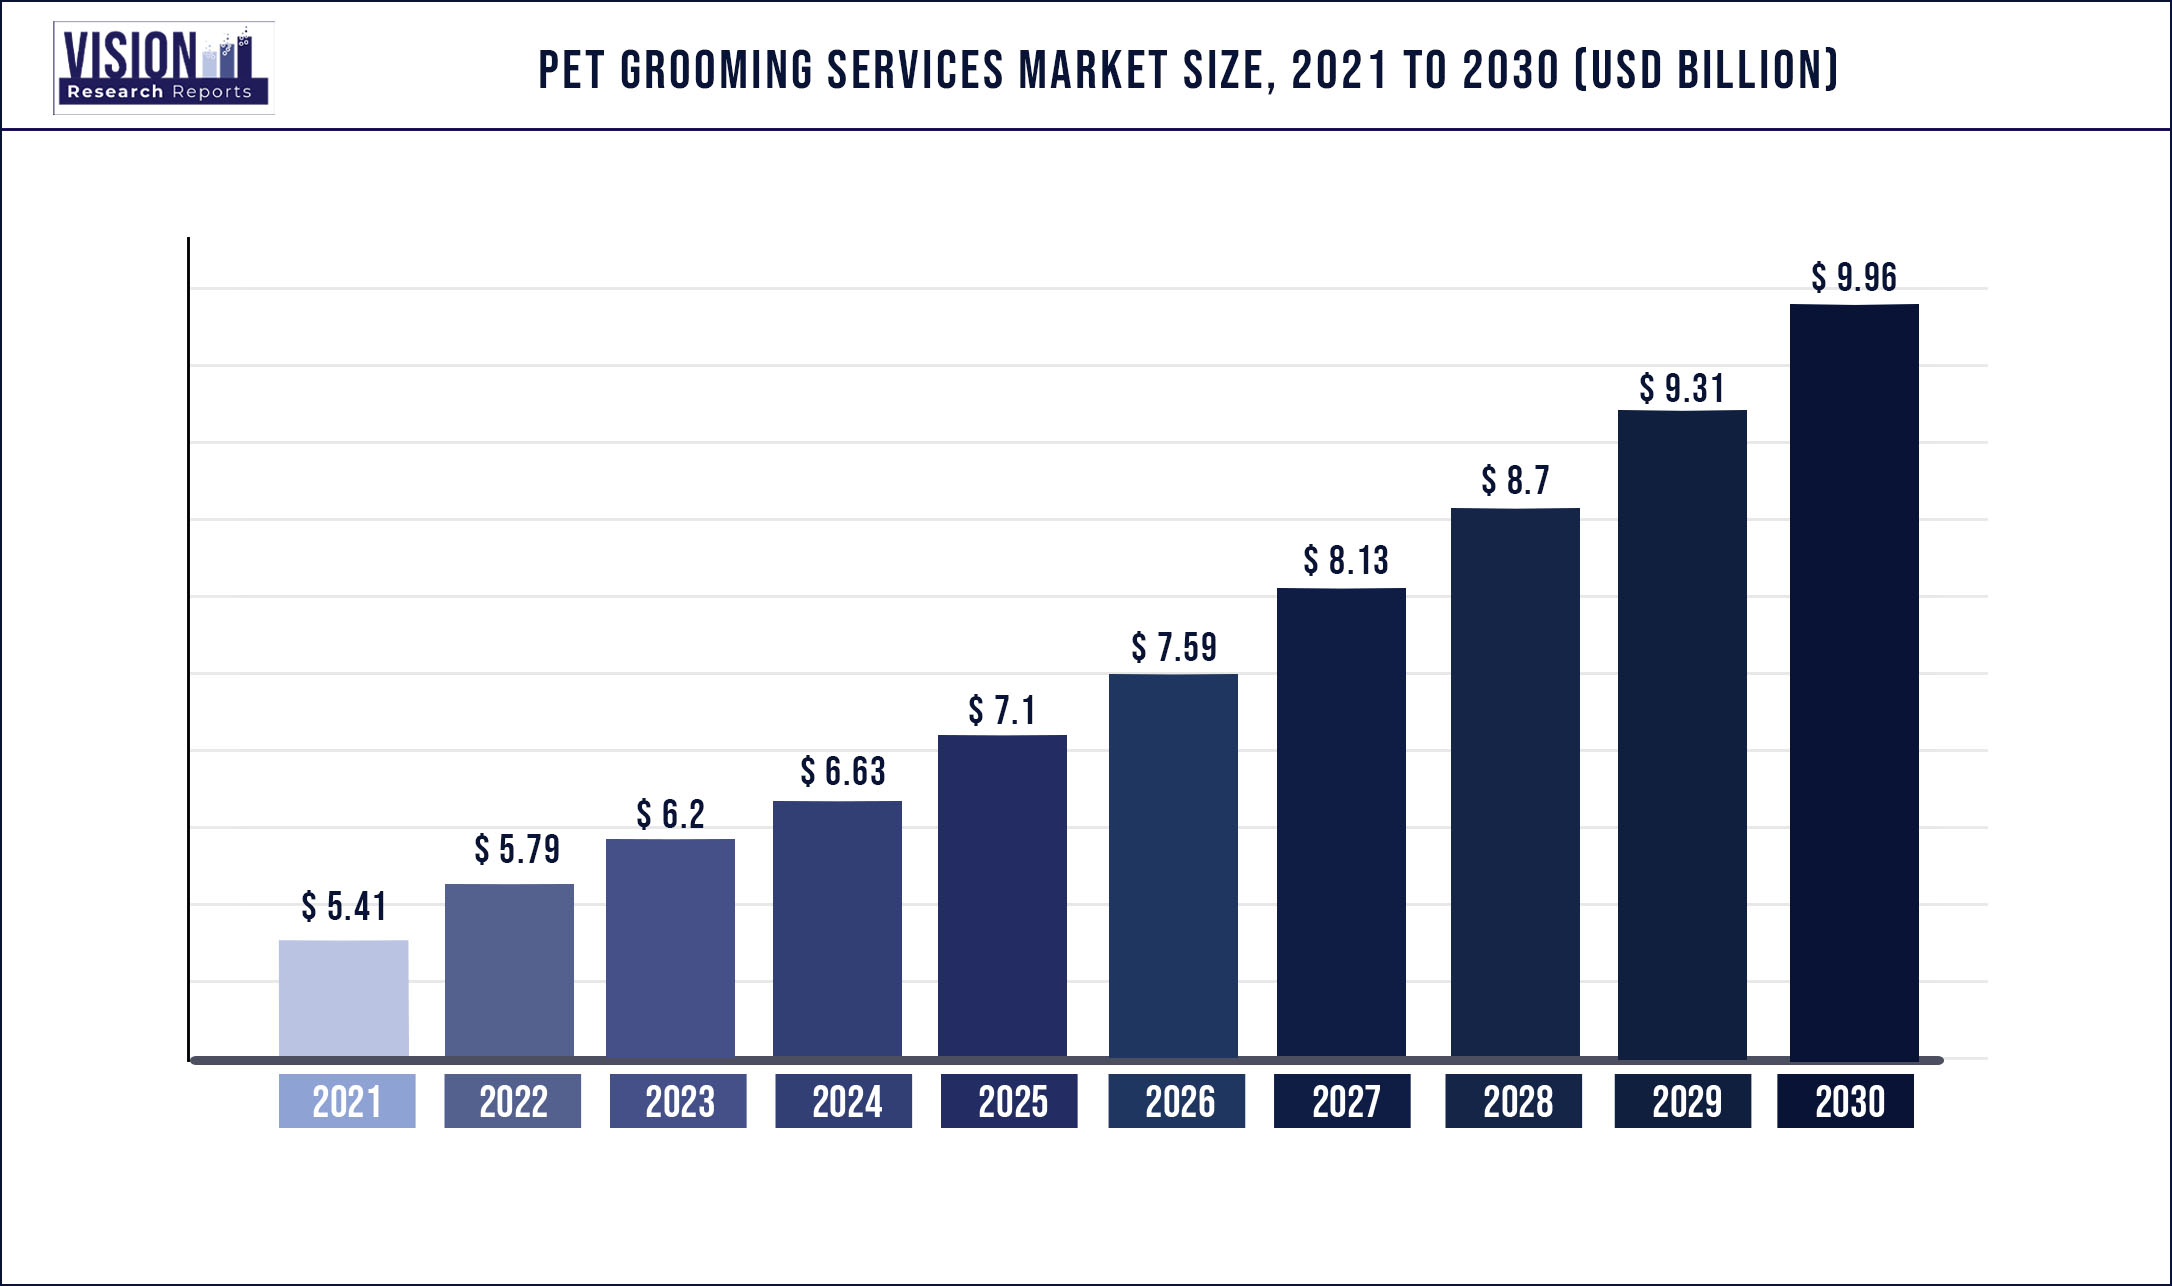 Pet Grooming Services Market Size 2021 to 2030